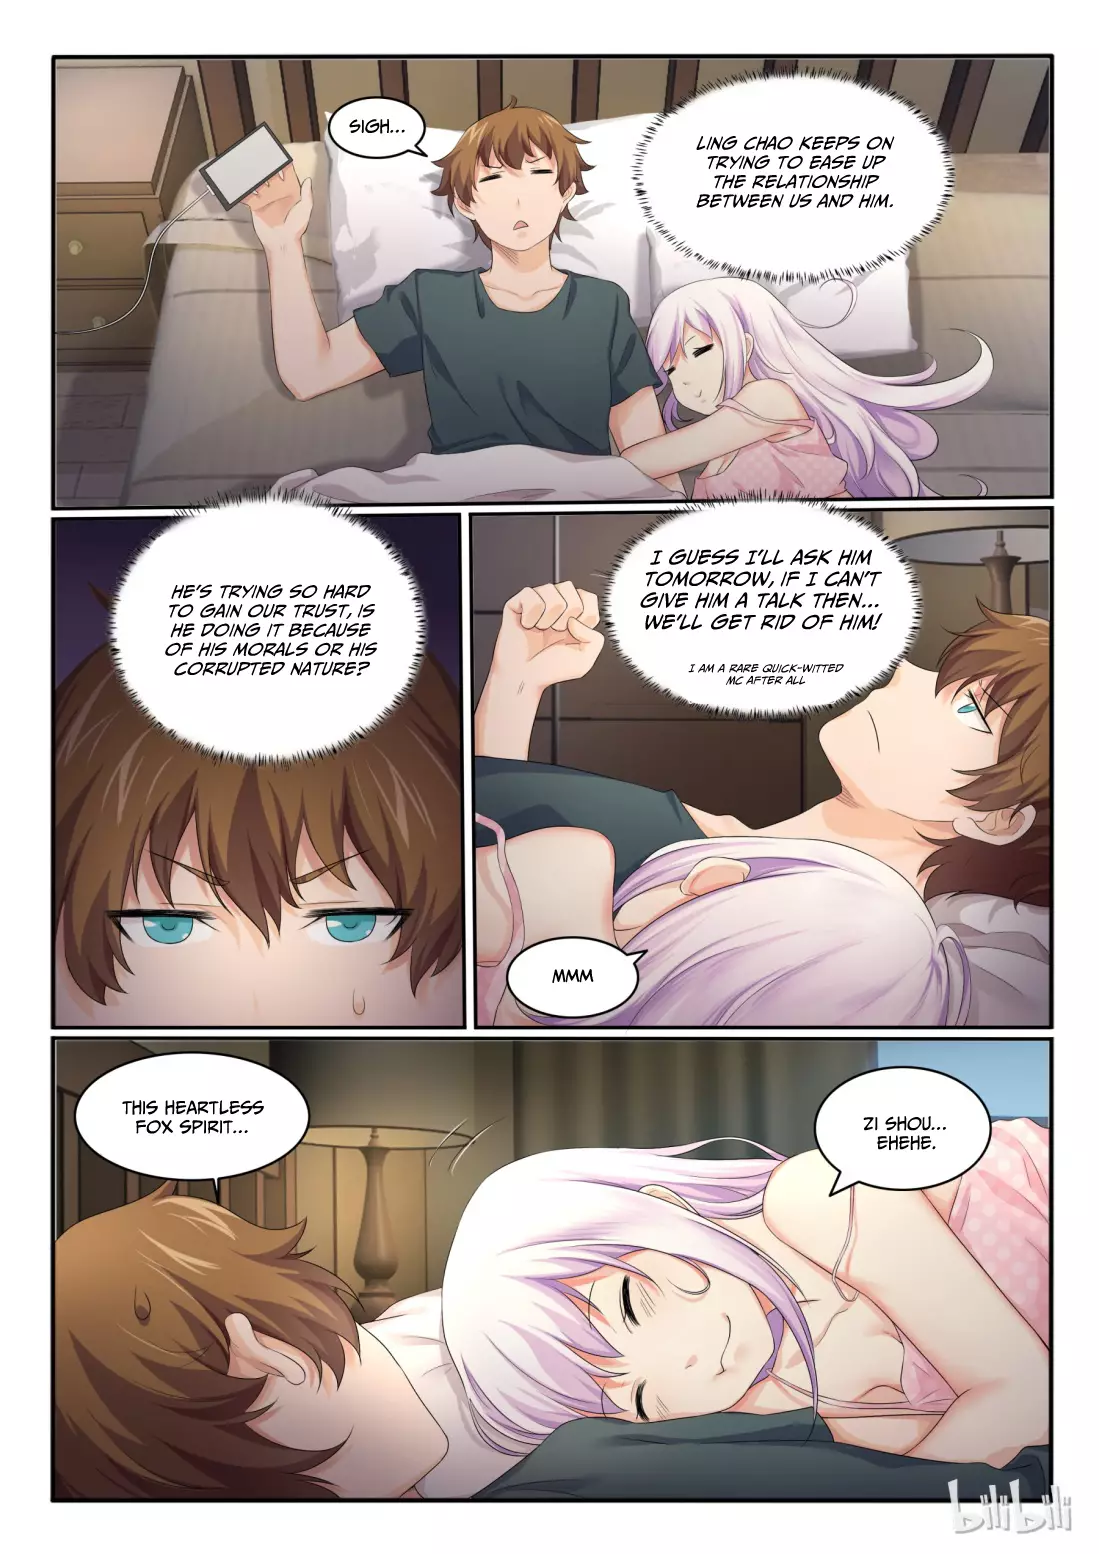 My Wife Is A Fox Spirit - 32 page 5